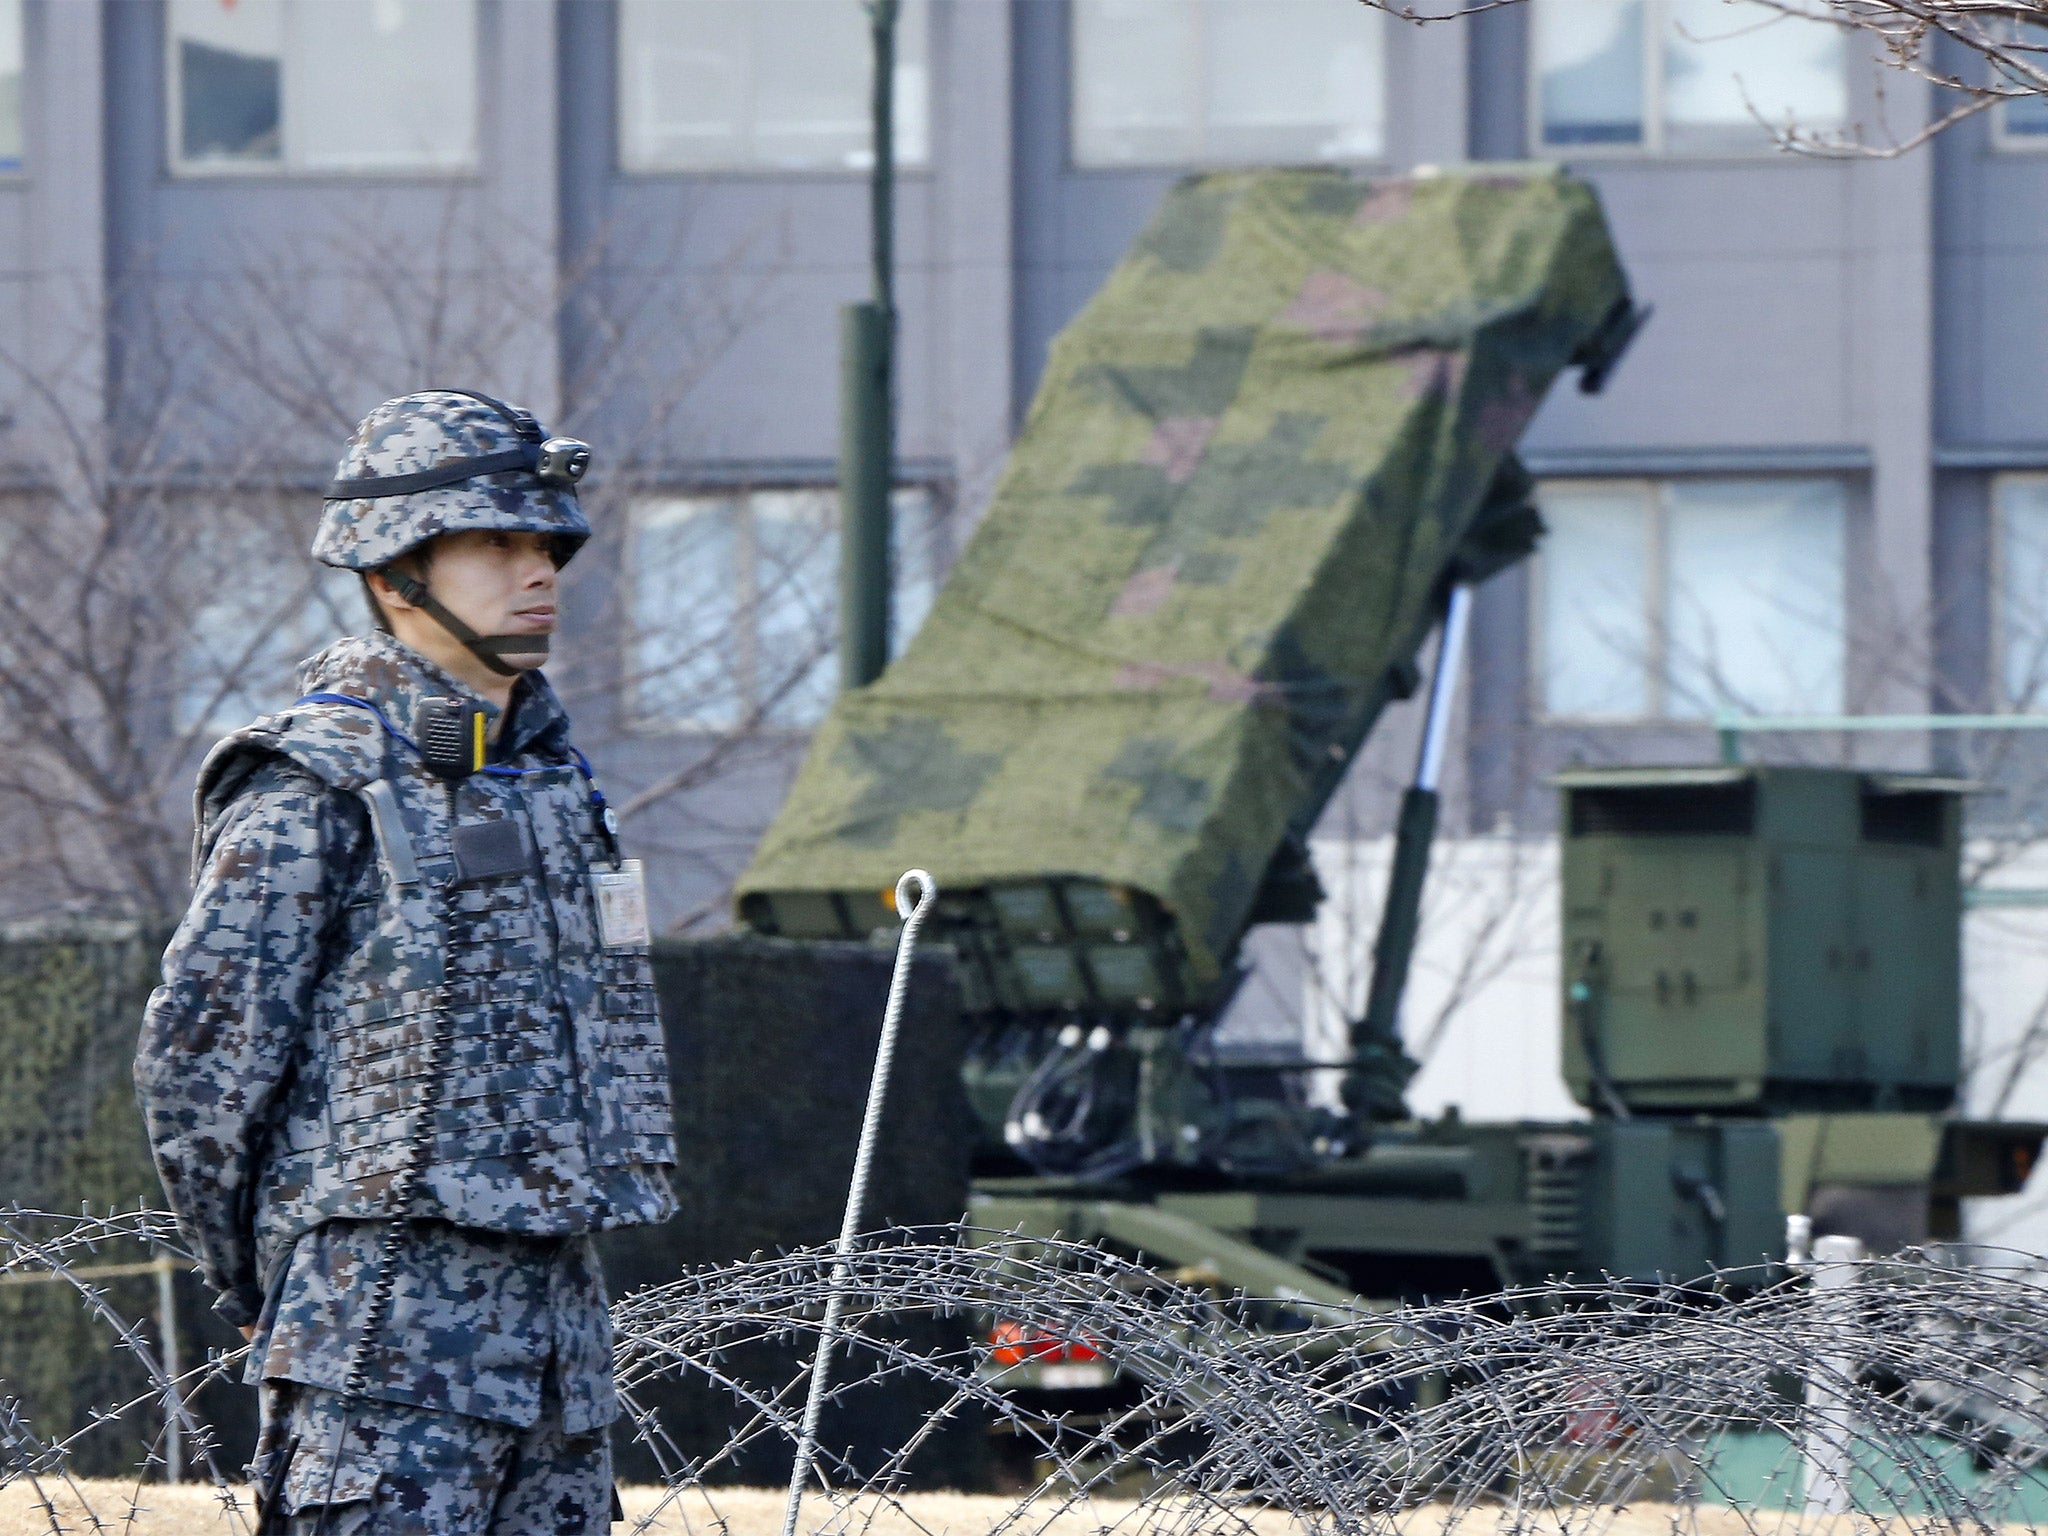 A Japanese soldier stands by a PAC-3 Patriot missile unit deployed for North Korea's rocket launch at the Defence Ministry in Tokyo